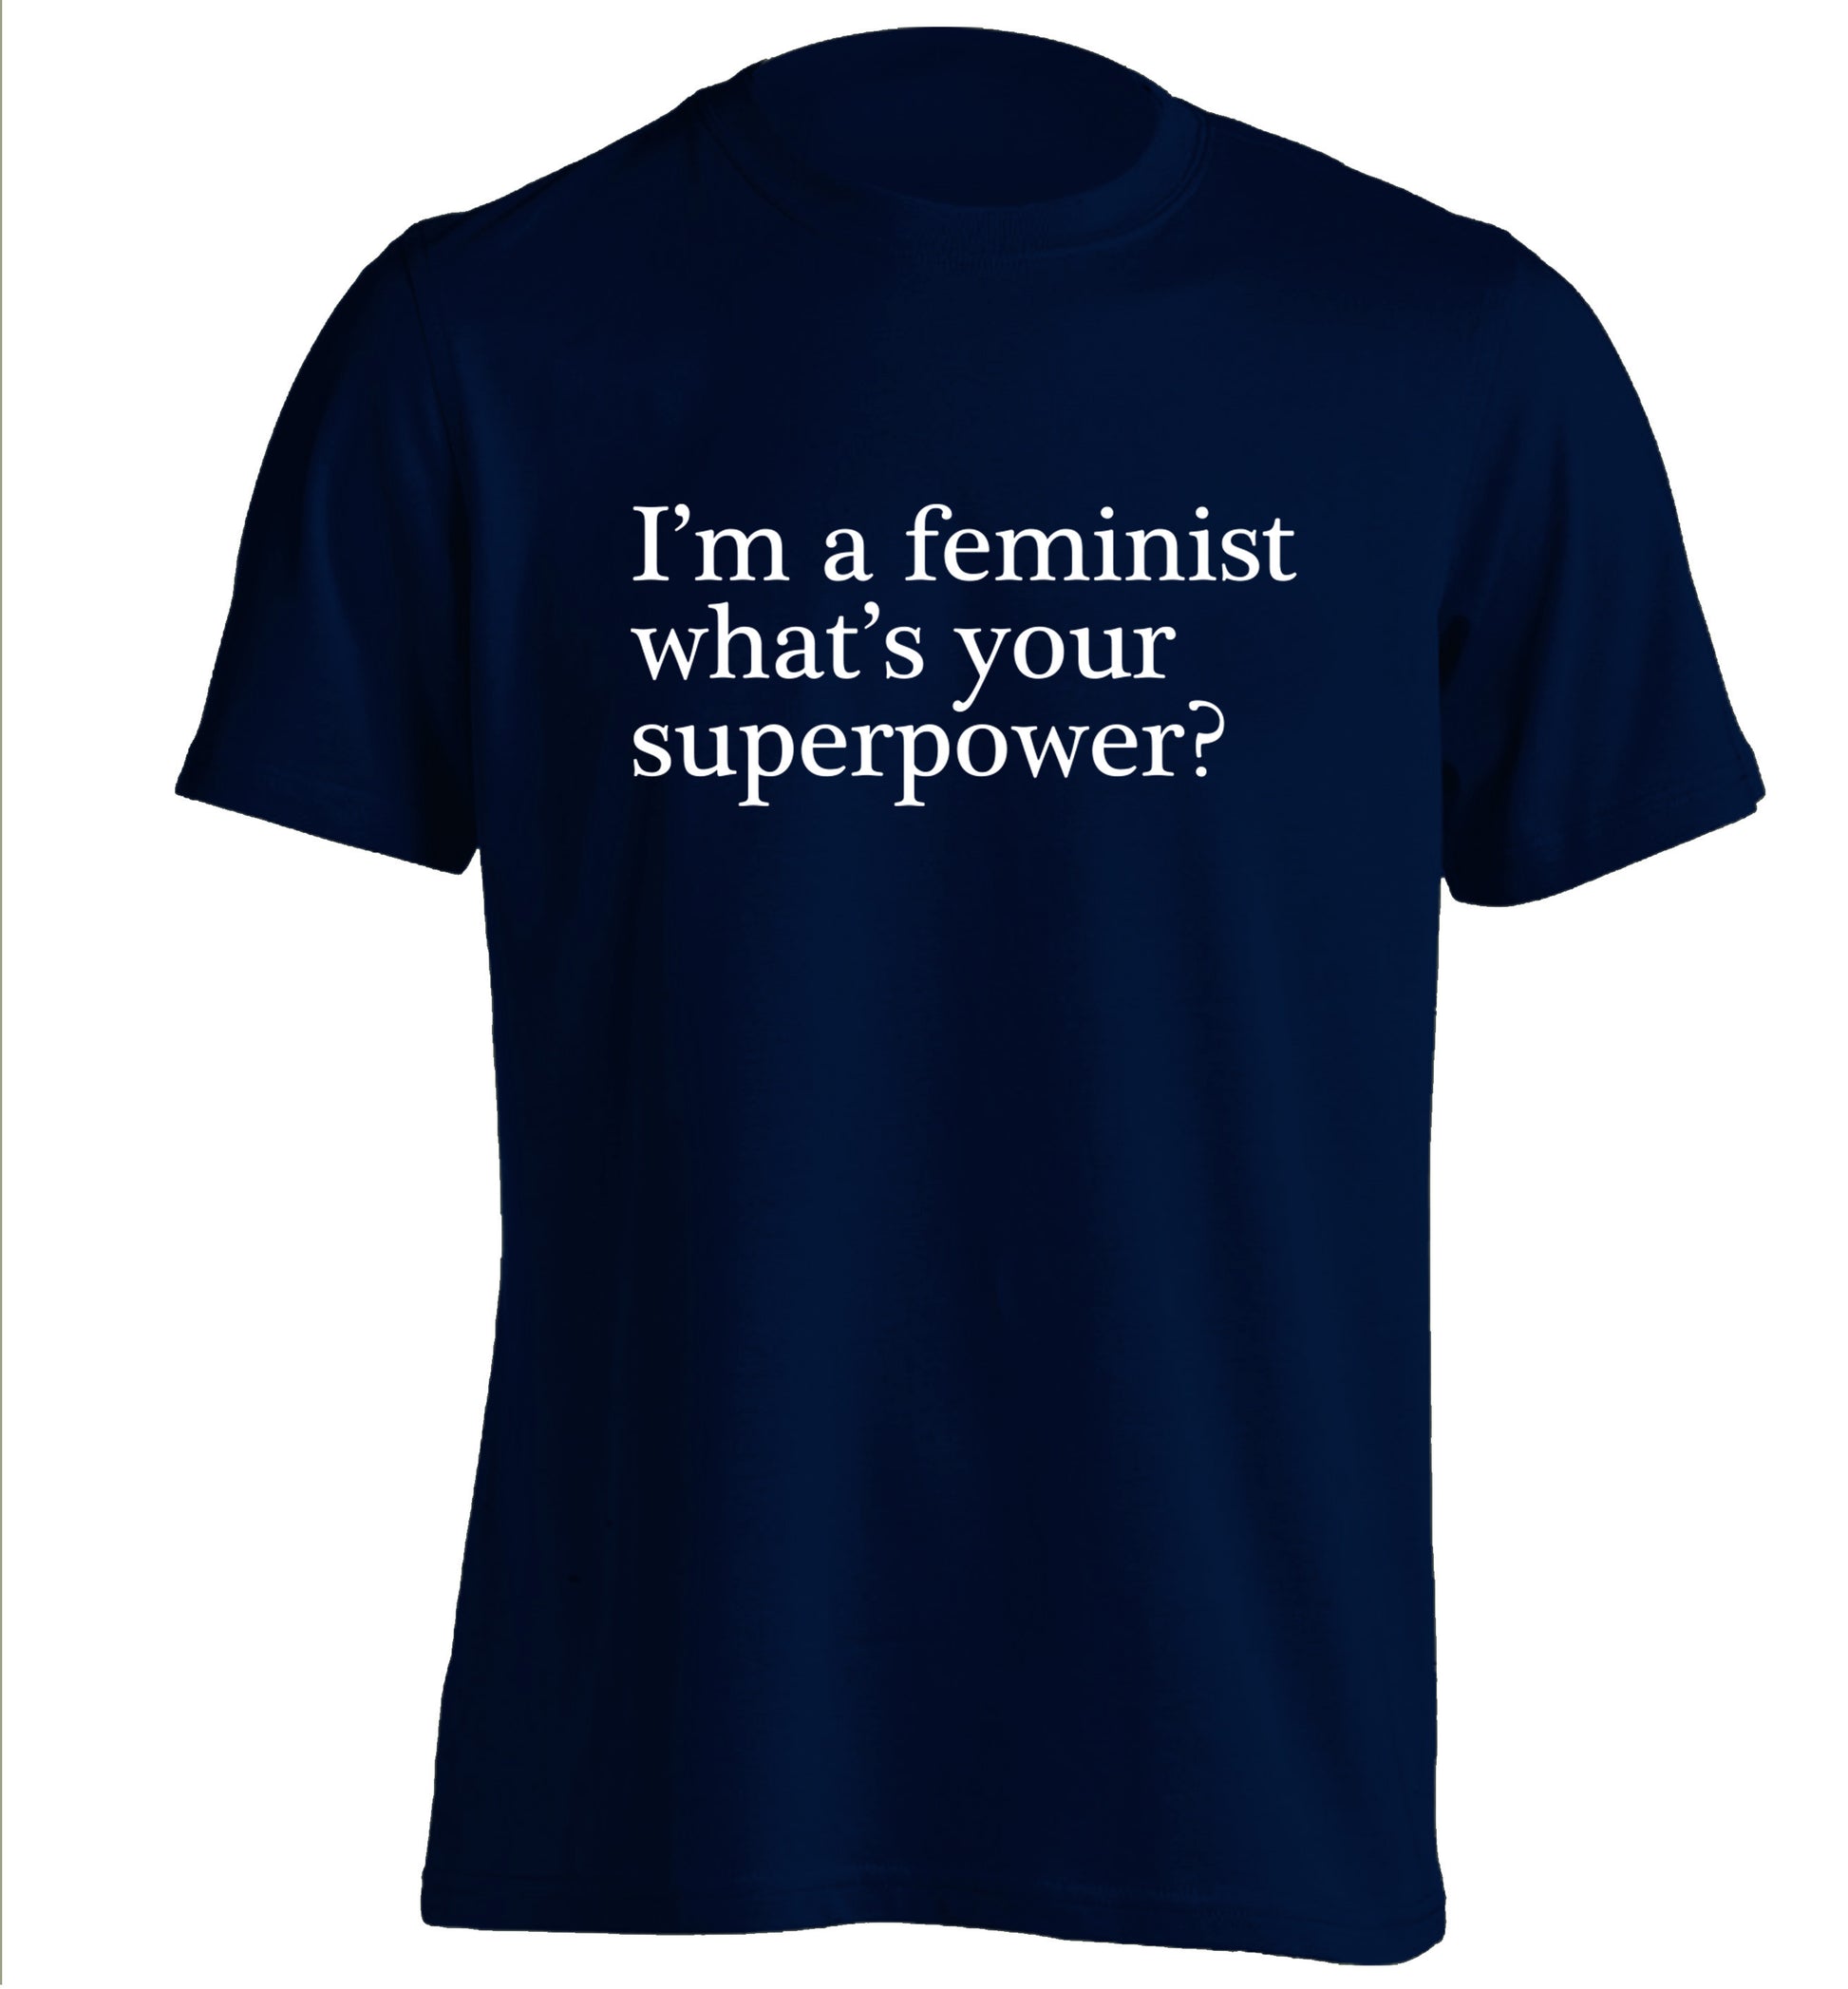 I'm a feminist what's your superpower? adults unisex navy Tshirt 2XL